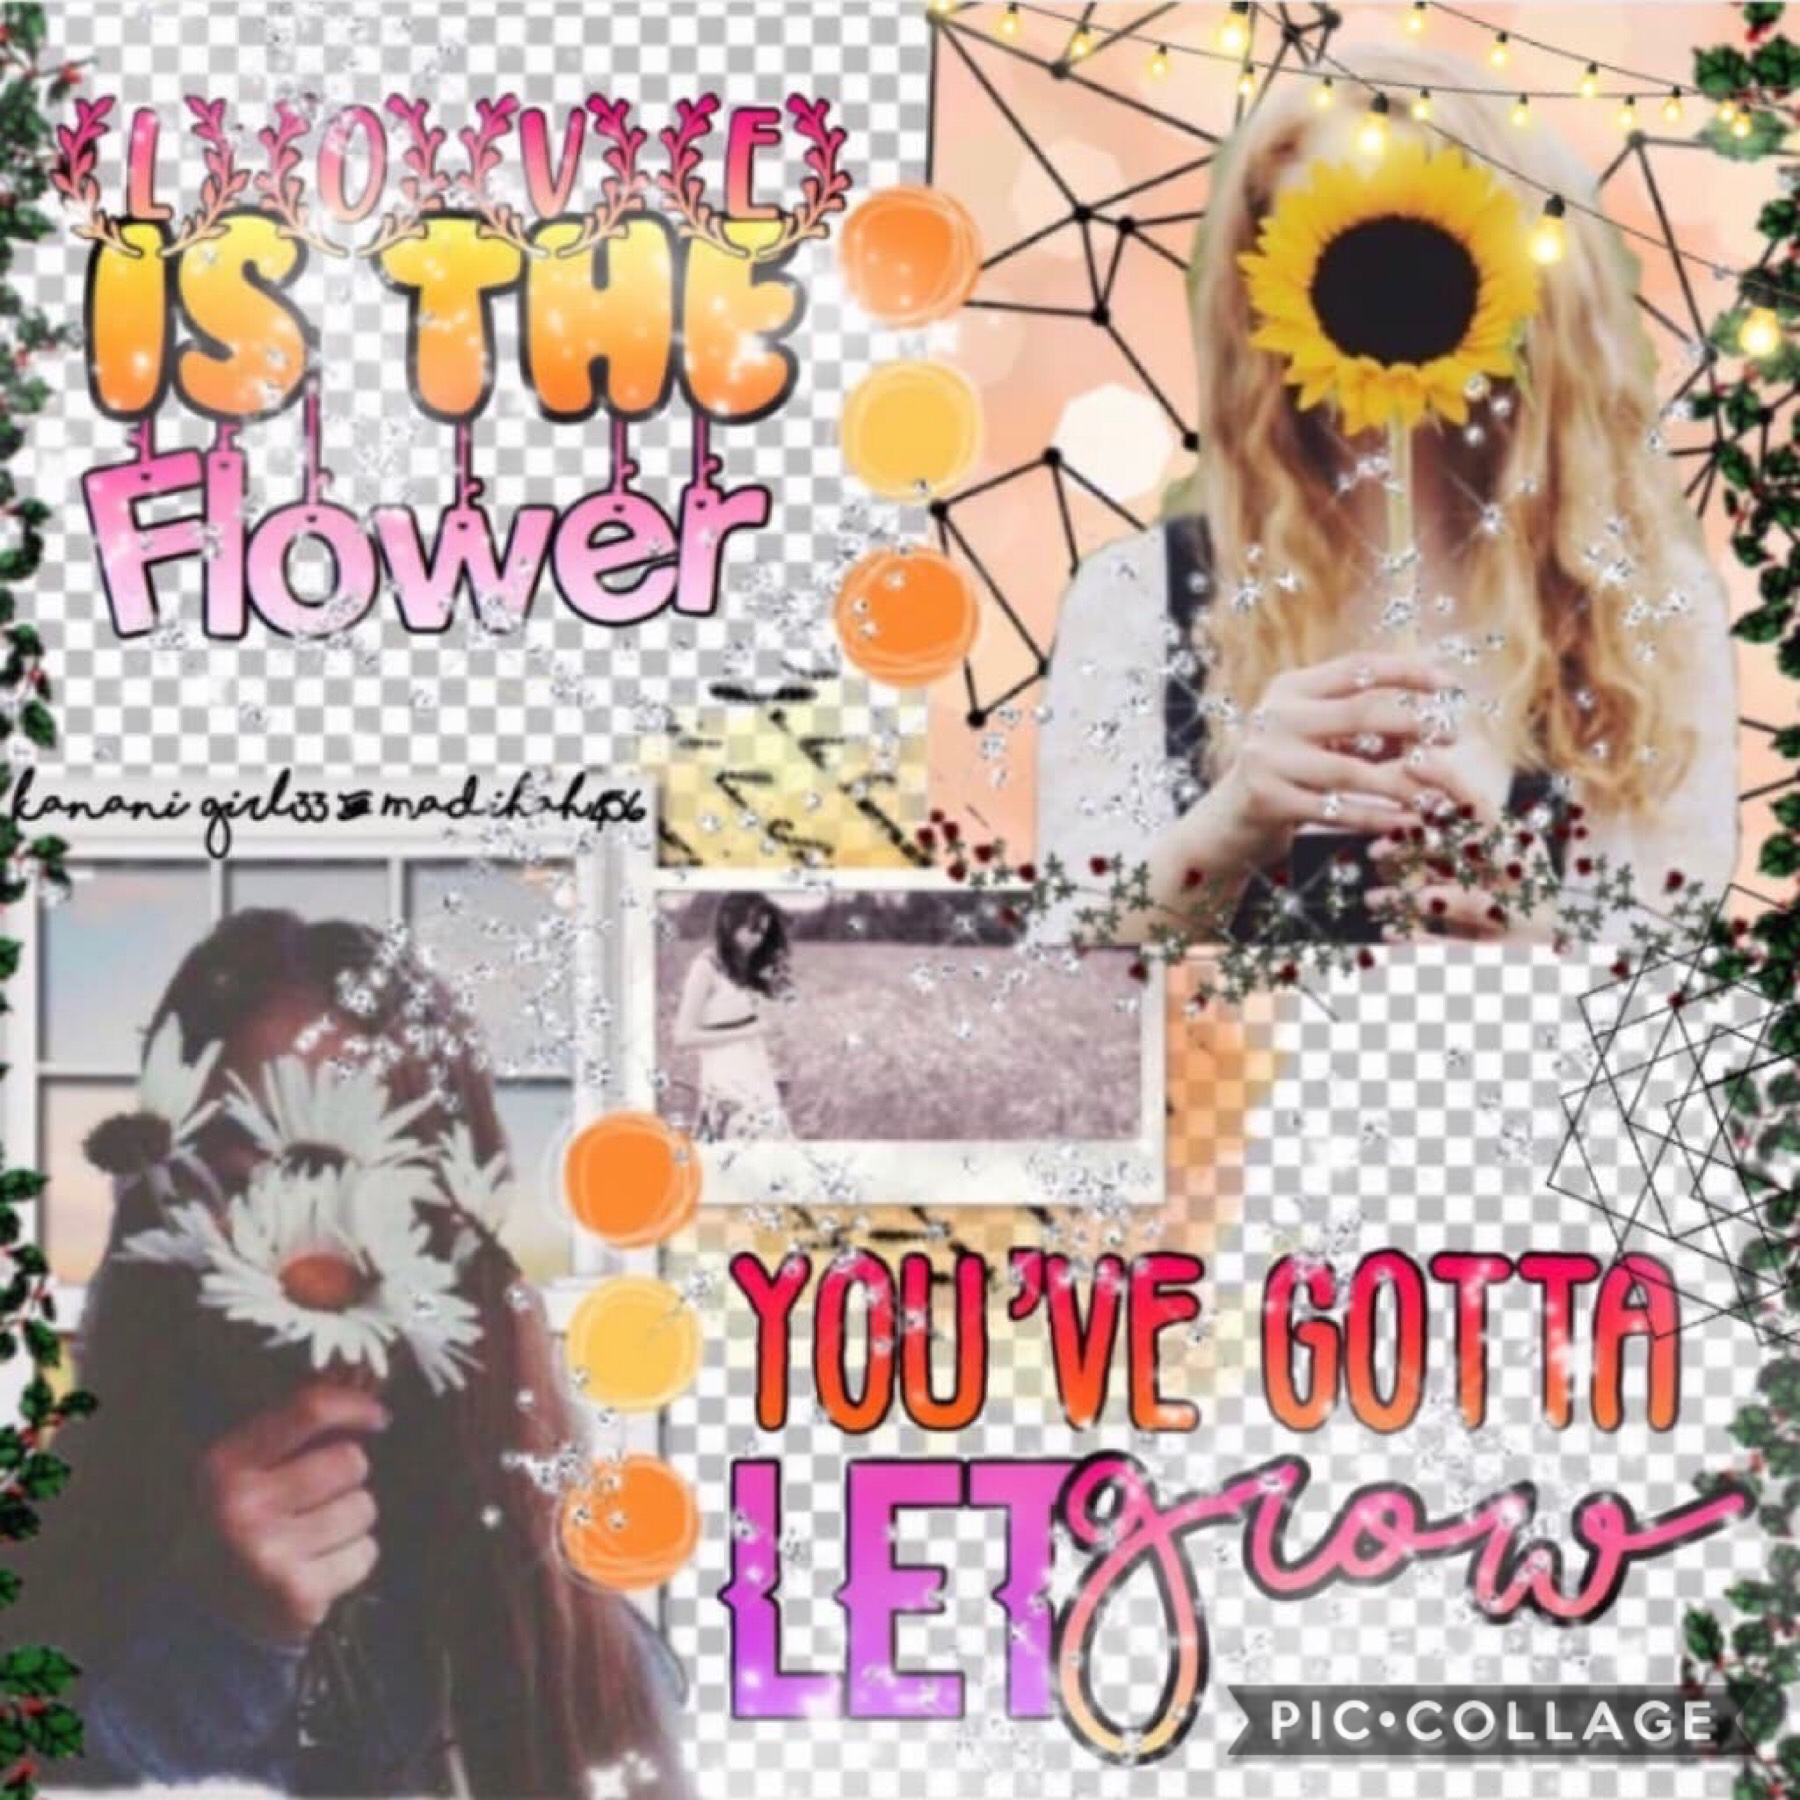 Collab with ♥️♥️♥️
Madihah456!!!!!
This girl is just amazing!! She did the background and I did the text! 
Qotd: what is your favorite flower? Answer with an emoji 🌺🌹🌷🌸🌻💐